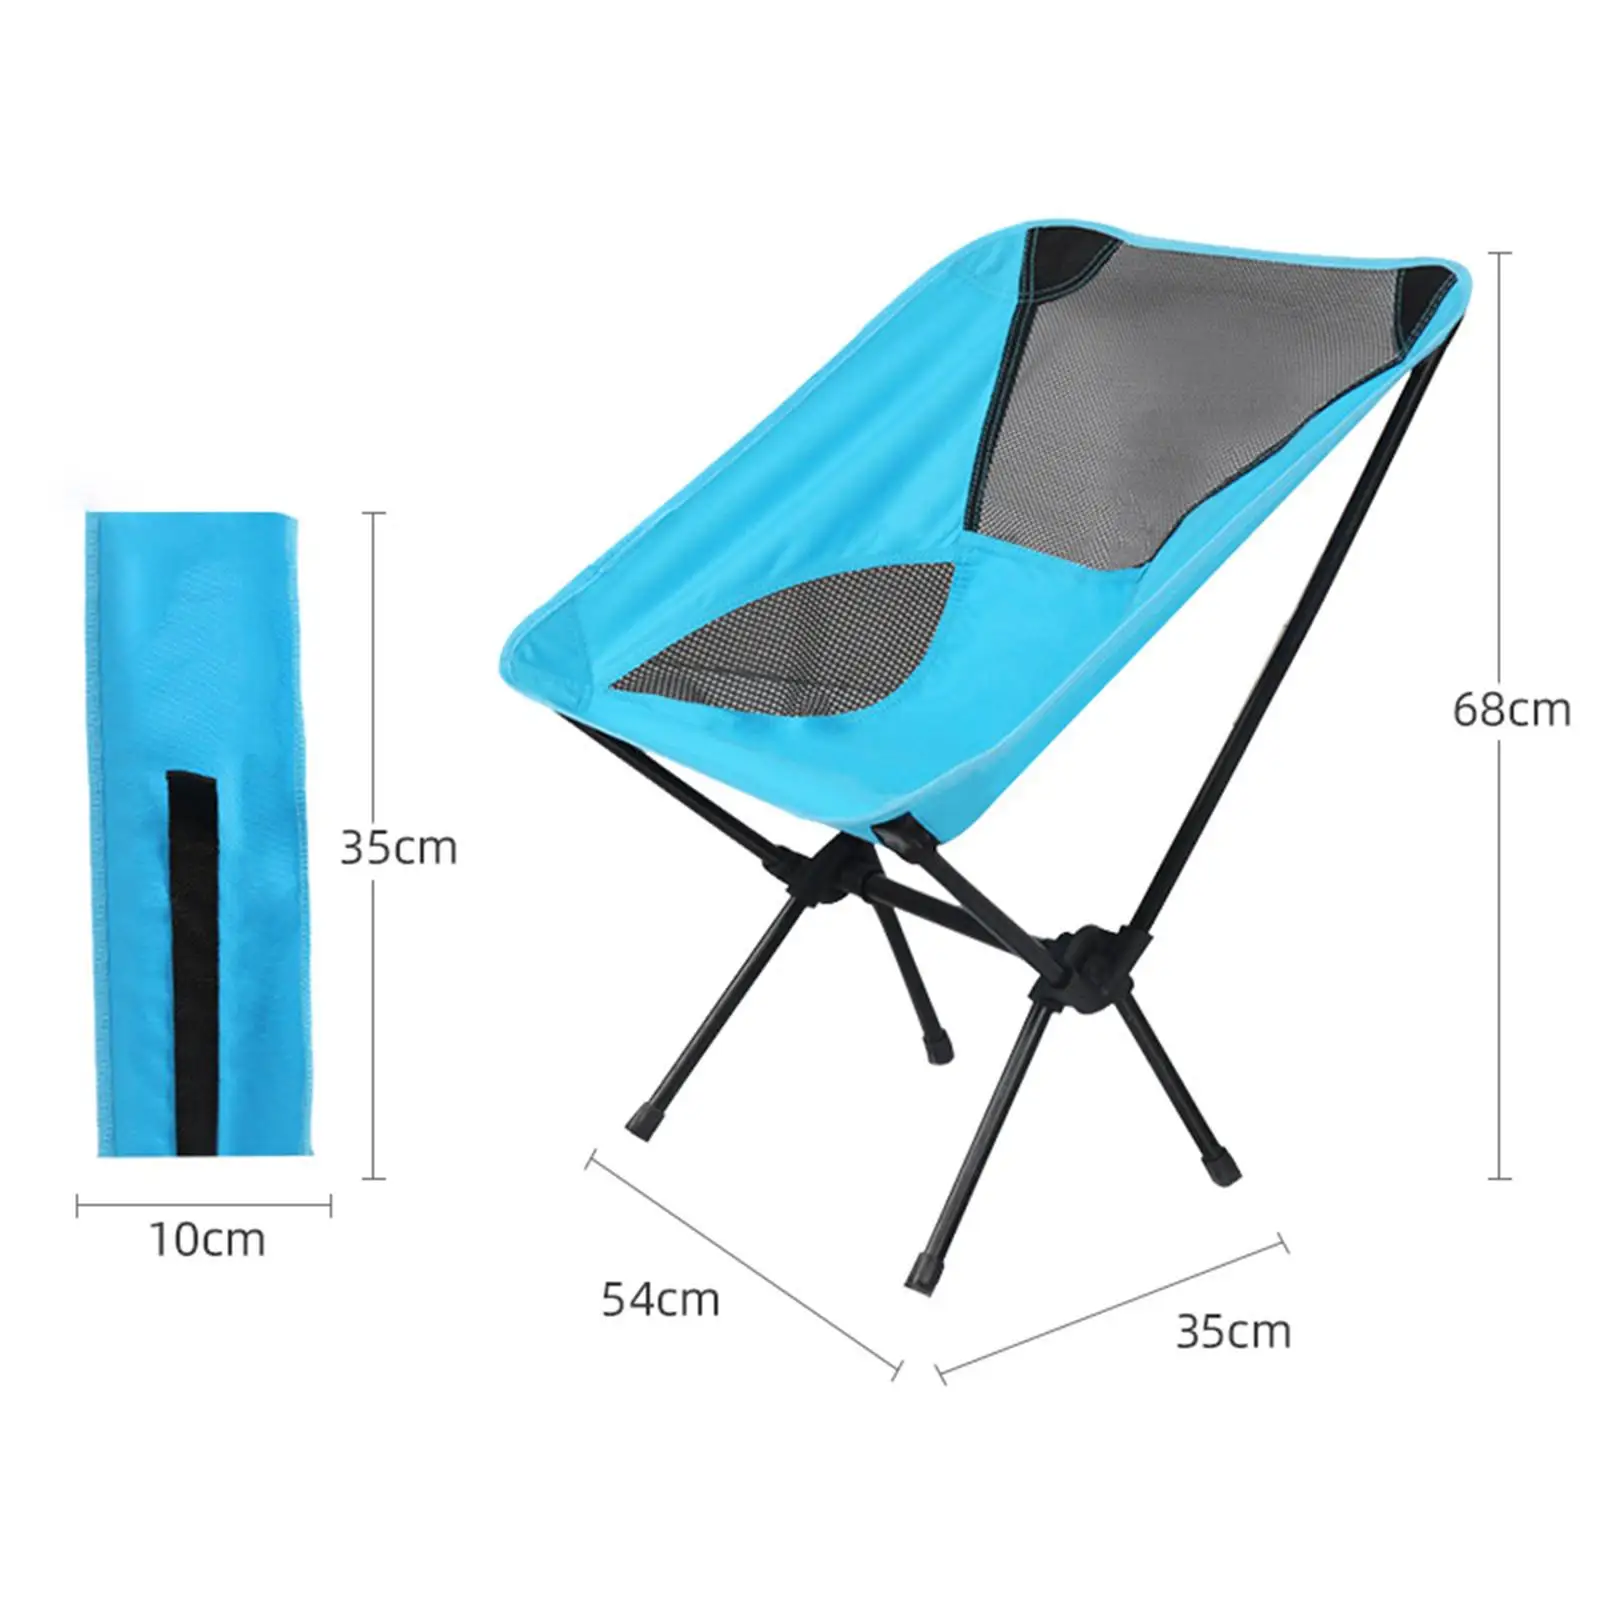 Portable Outdoor Hiking Camping Chair Folding Fishing Beach Seat, Durable Metal Tube Legs, Heavy Duty Oxford Canvas